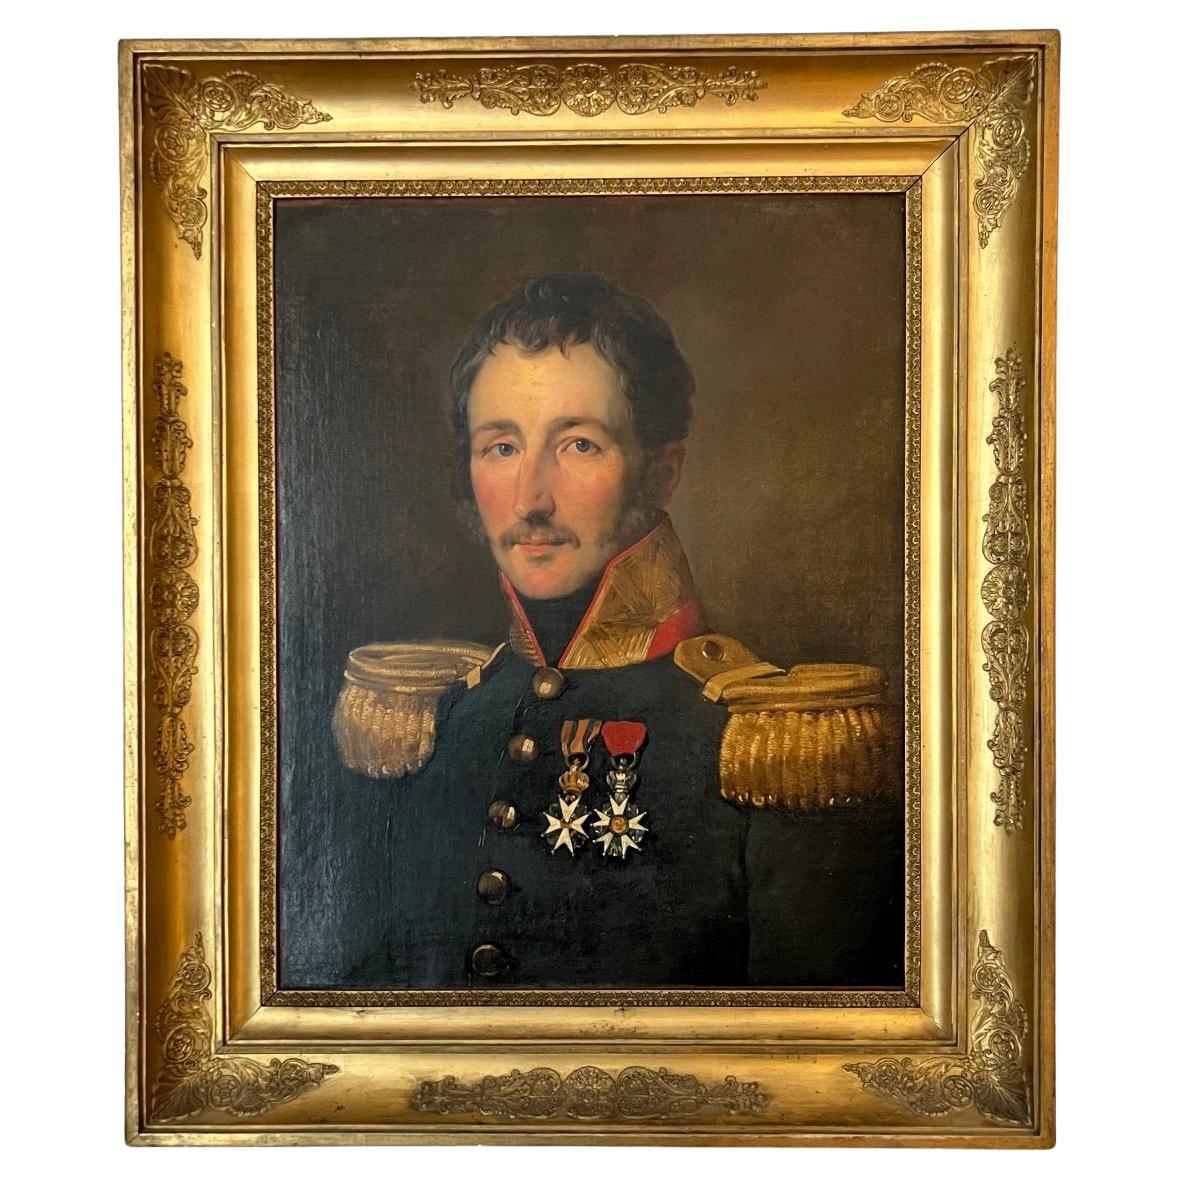 Portrait Of General Goethals Attributed to Gustaaf Wappers (1803-1874) 